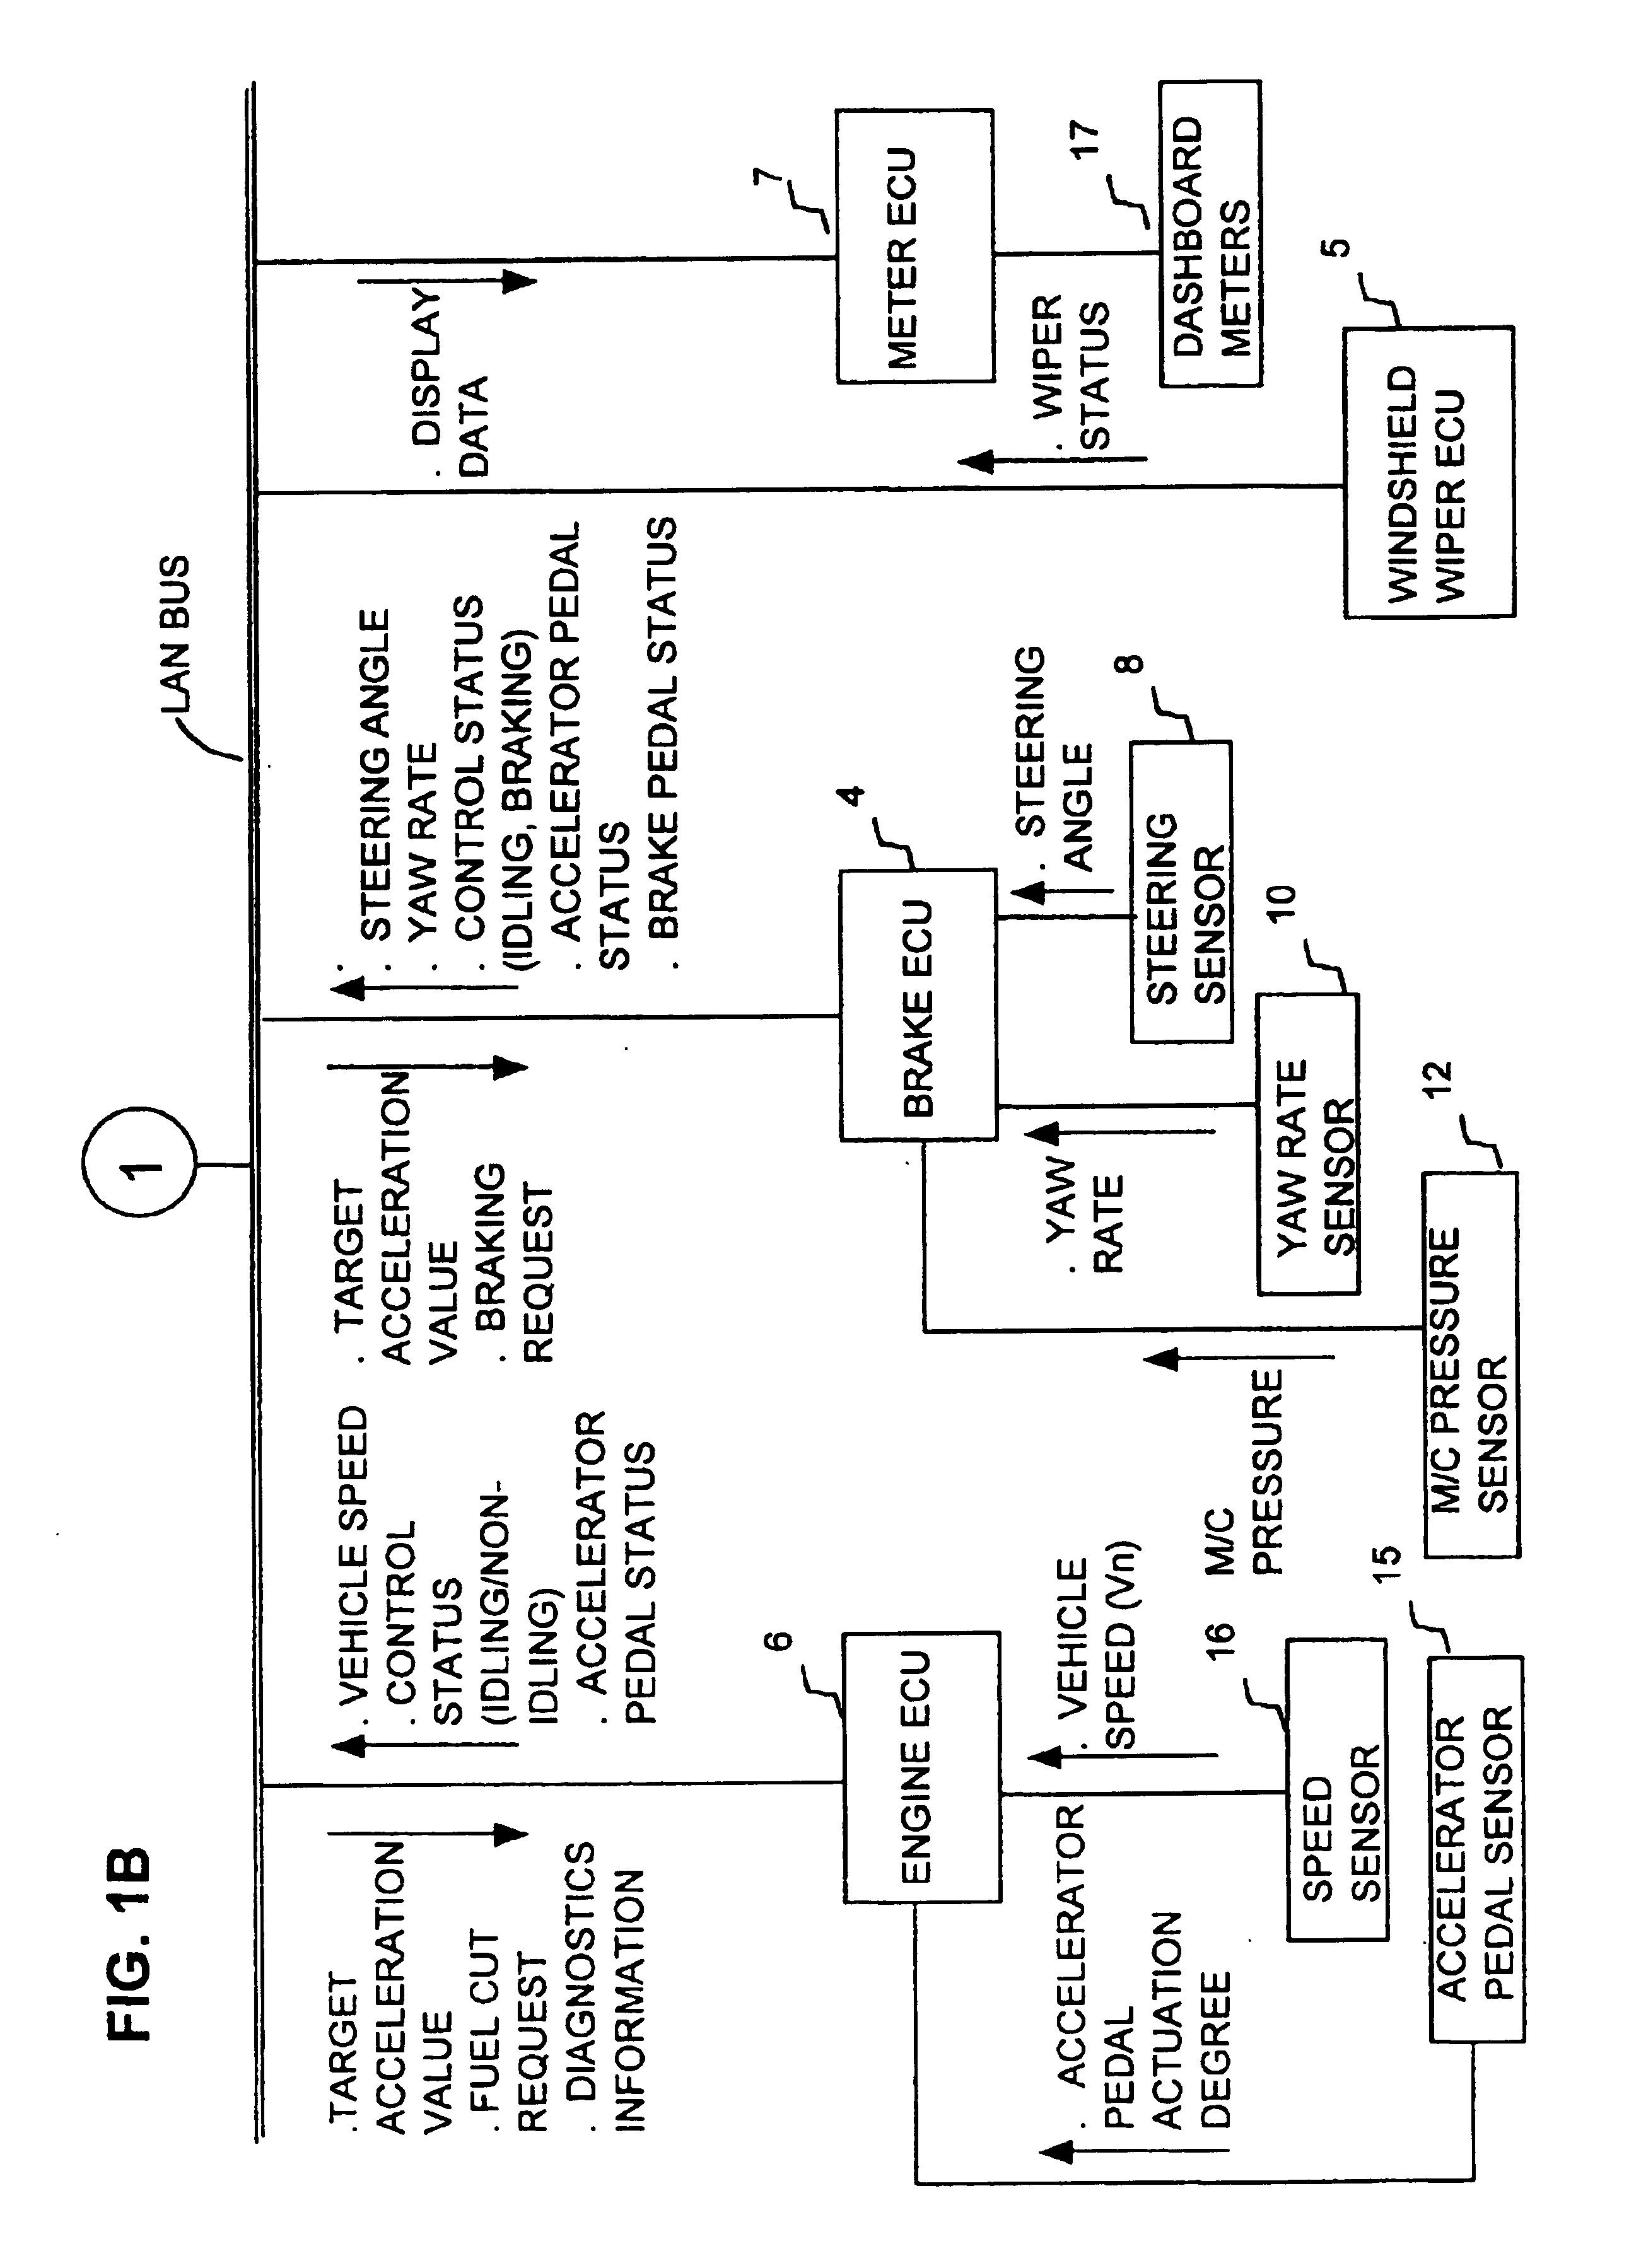 Cruise control apparatus performing automatic adjustment of object recognition processing in response to driver actions relating to vehicle speed alteration